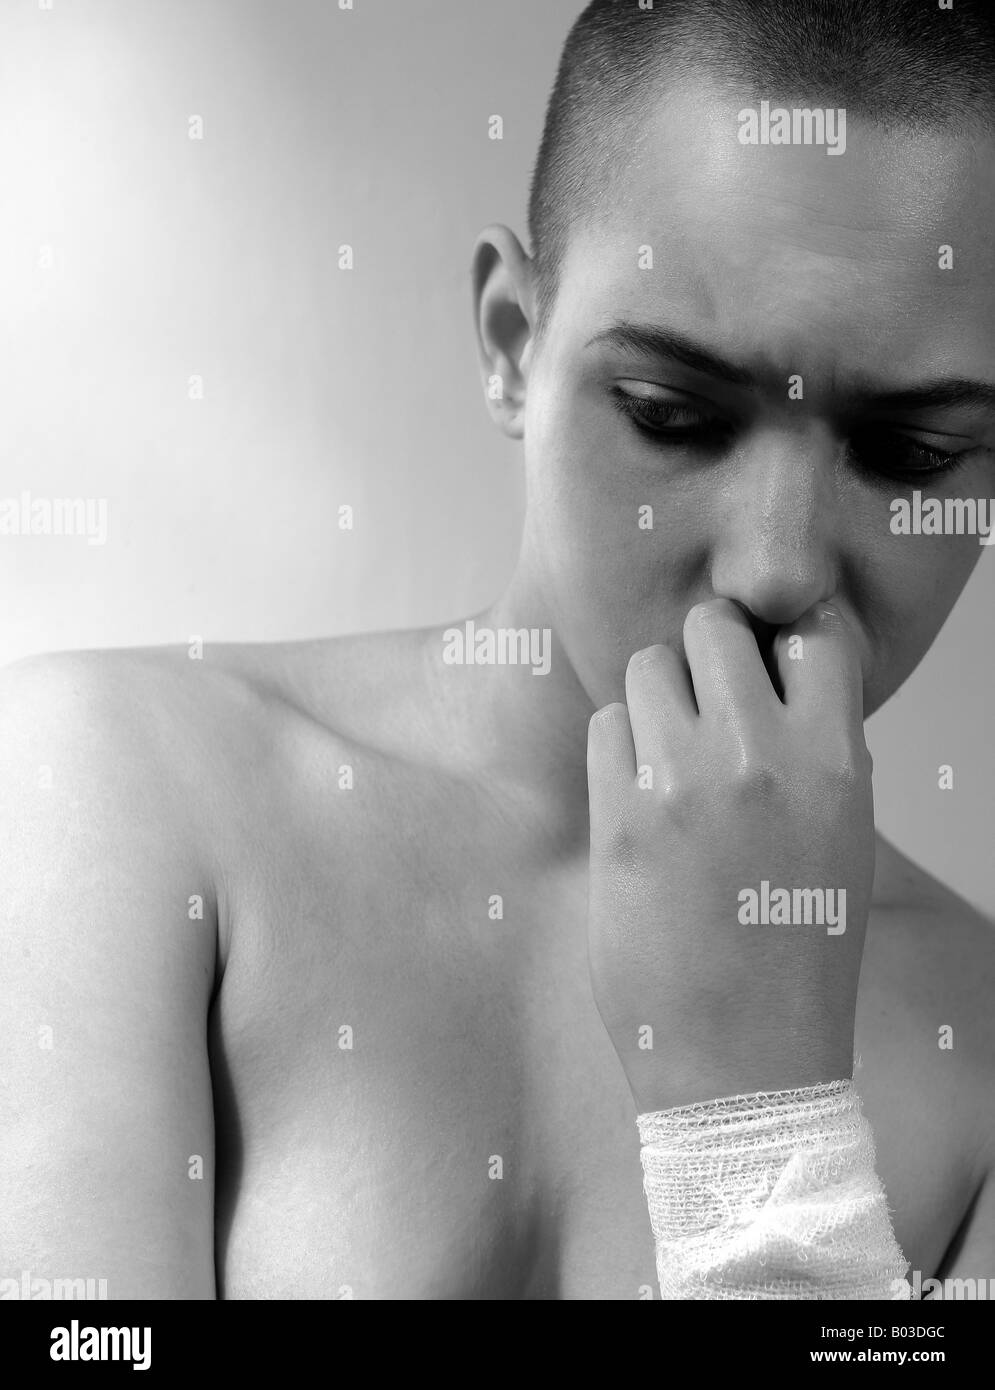 Teen pain: troubled teenager (19) with bandaged wrist Stock Photo